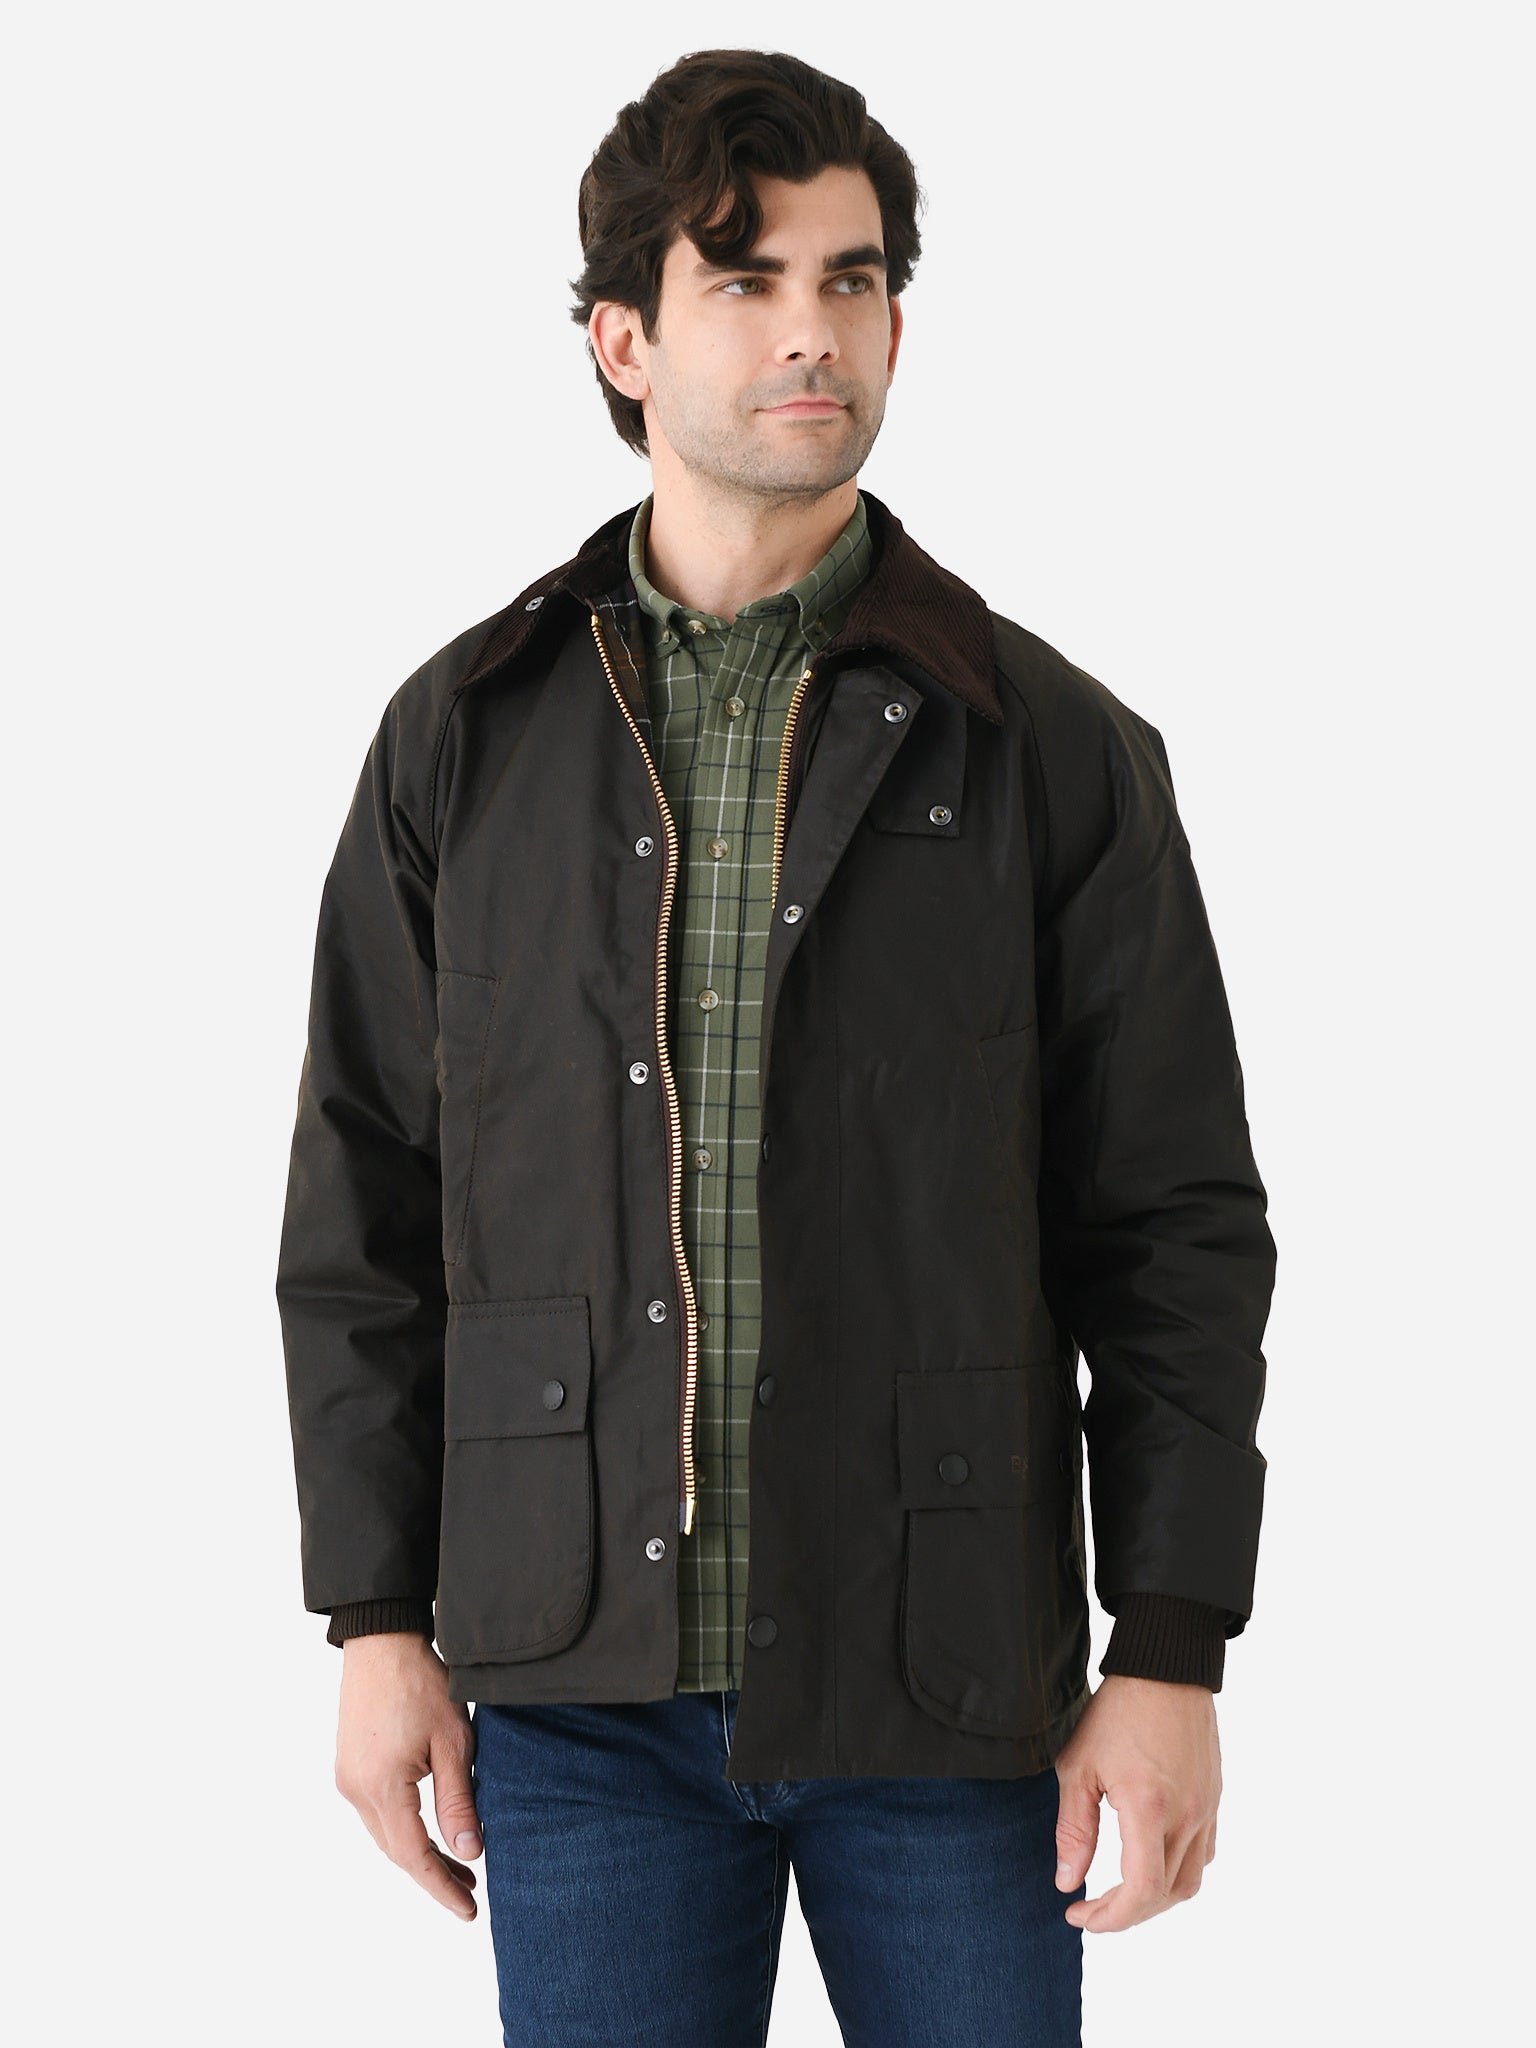 Barbour Classic Bedale Wax Jacket - Olive - 44